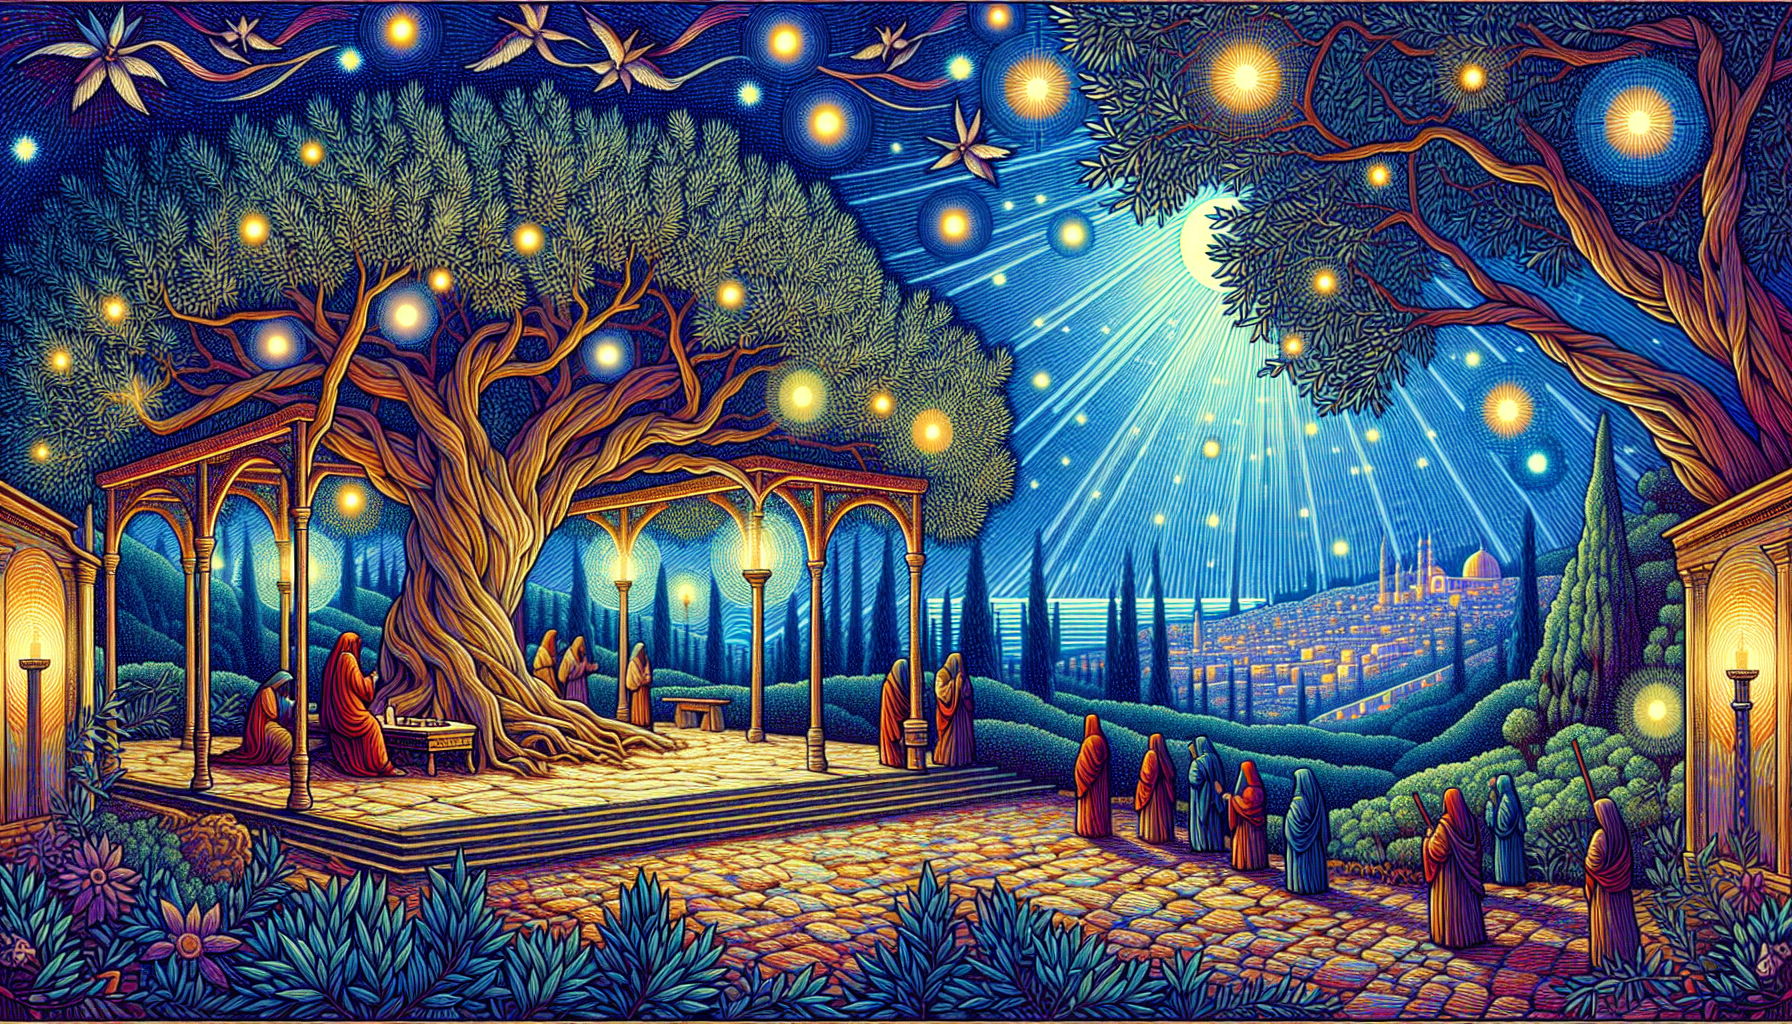 Create a detailed and vivid illustration of the Garden of Gethsemane, capturing its historical and spiritual significance. Include ancient olive trees with twisted branches, a serene night-time settin